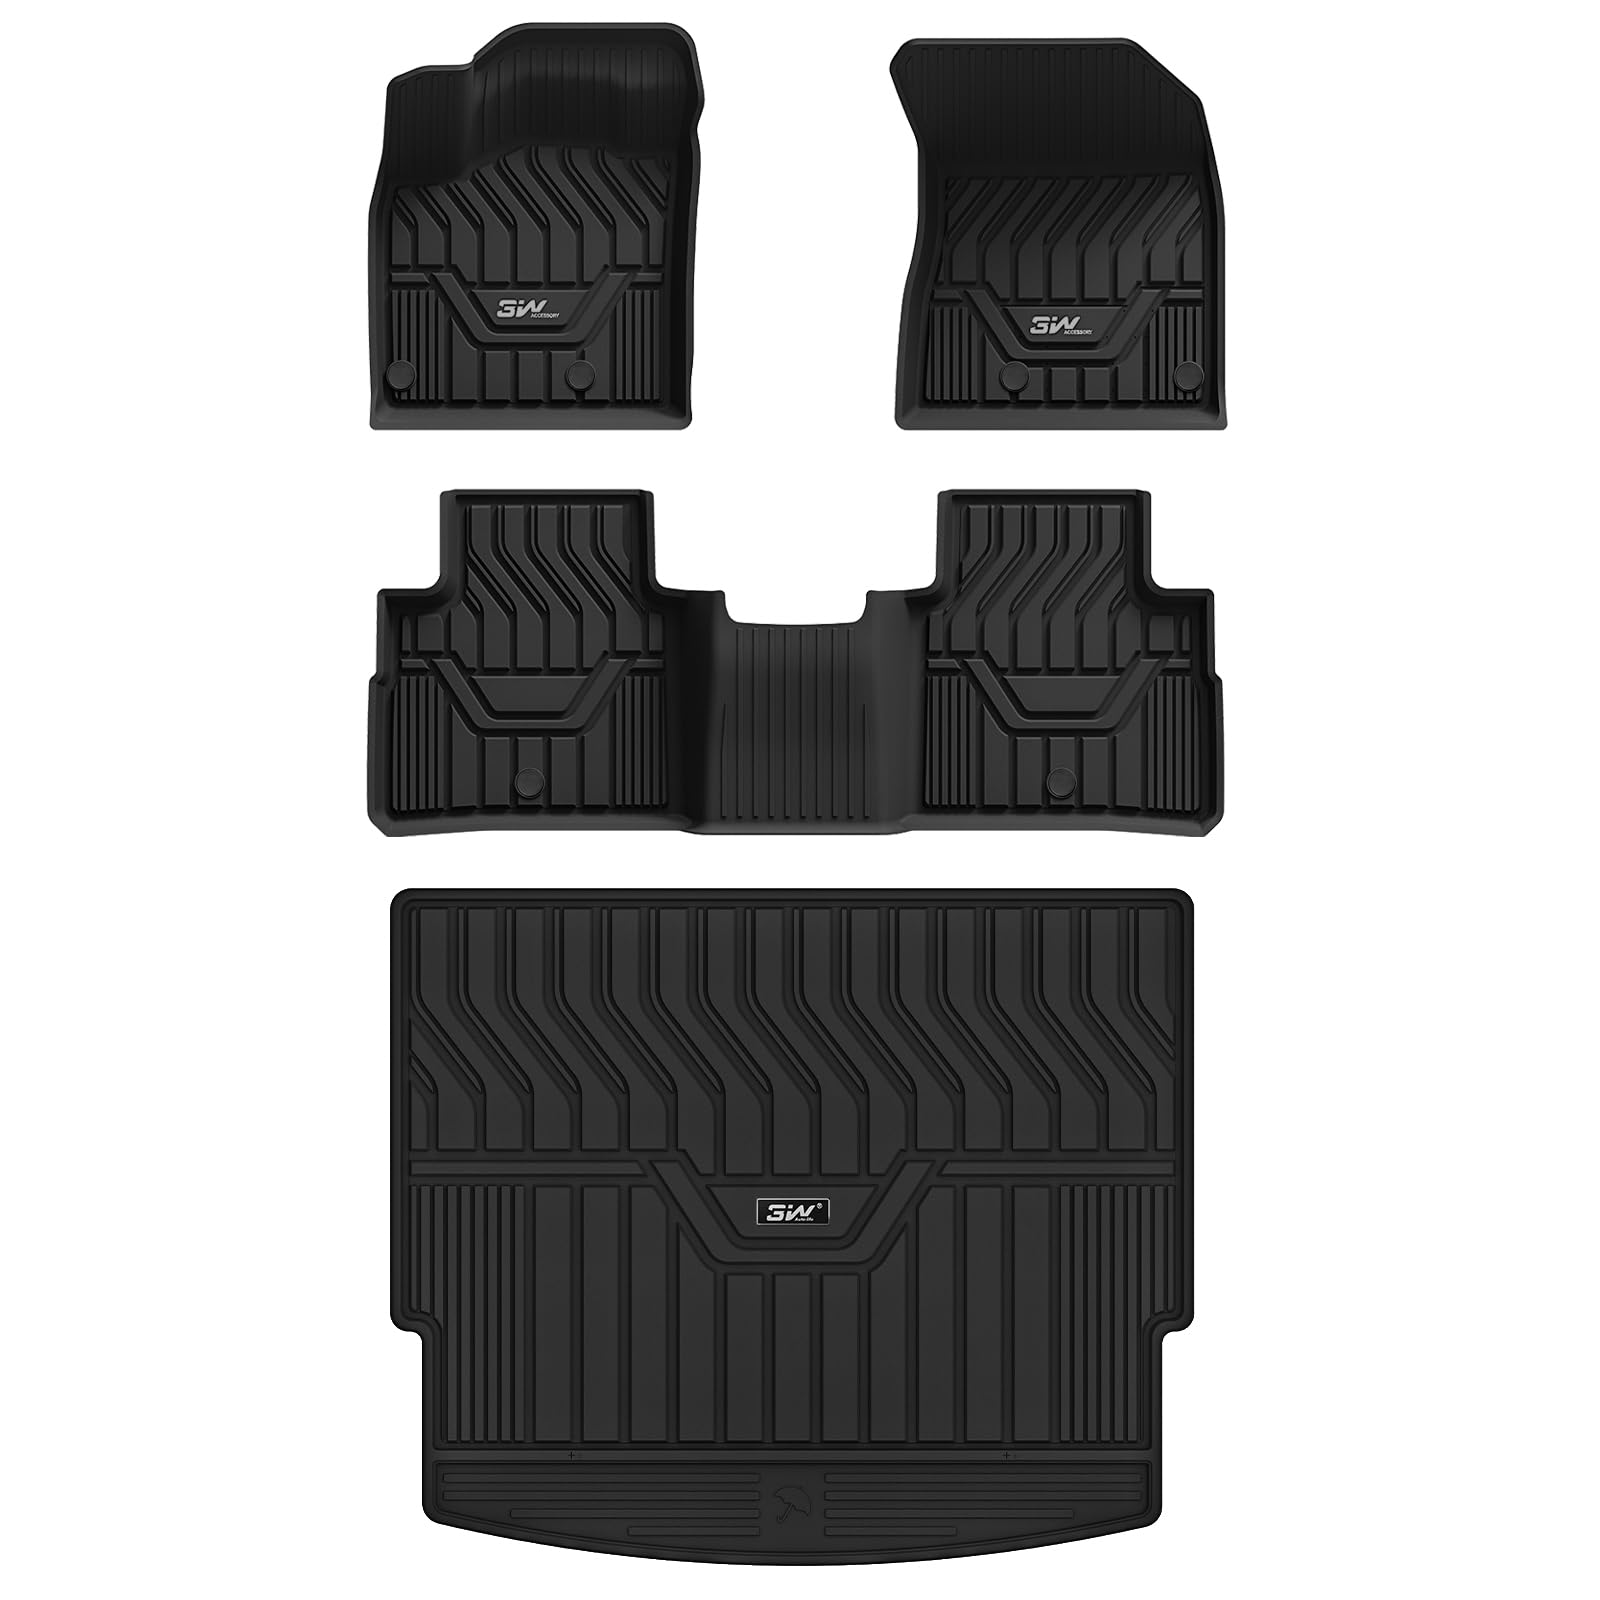 3W Nissan Rogue 2021-2023 Custom Floor Mats TPE Material & All-Weather Protection Vehicles & Parts 3Wliners 2021-2023 Rogue 2021-2023 1st&2nd Rows + Trunk Mat